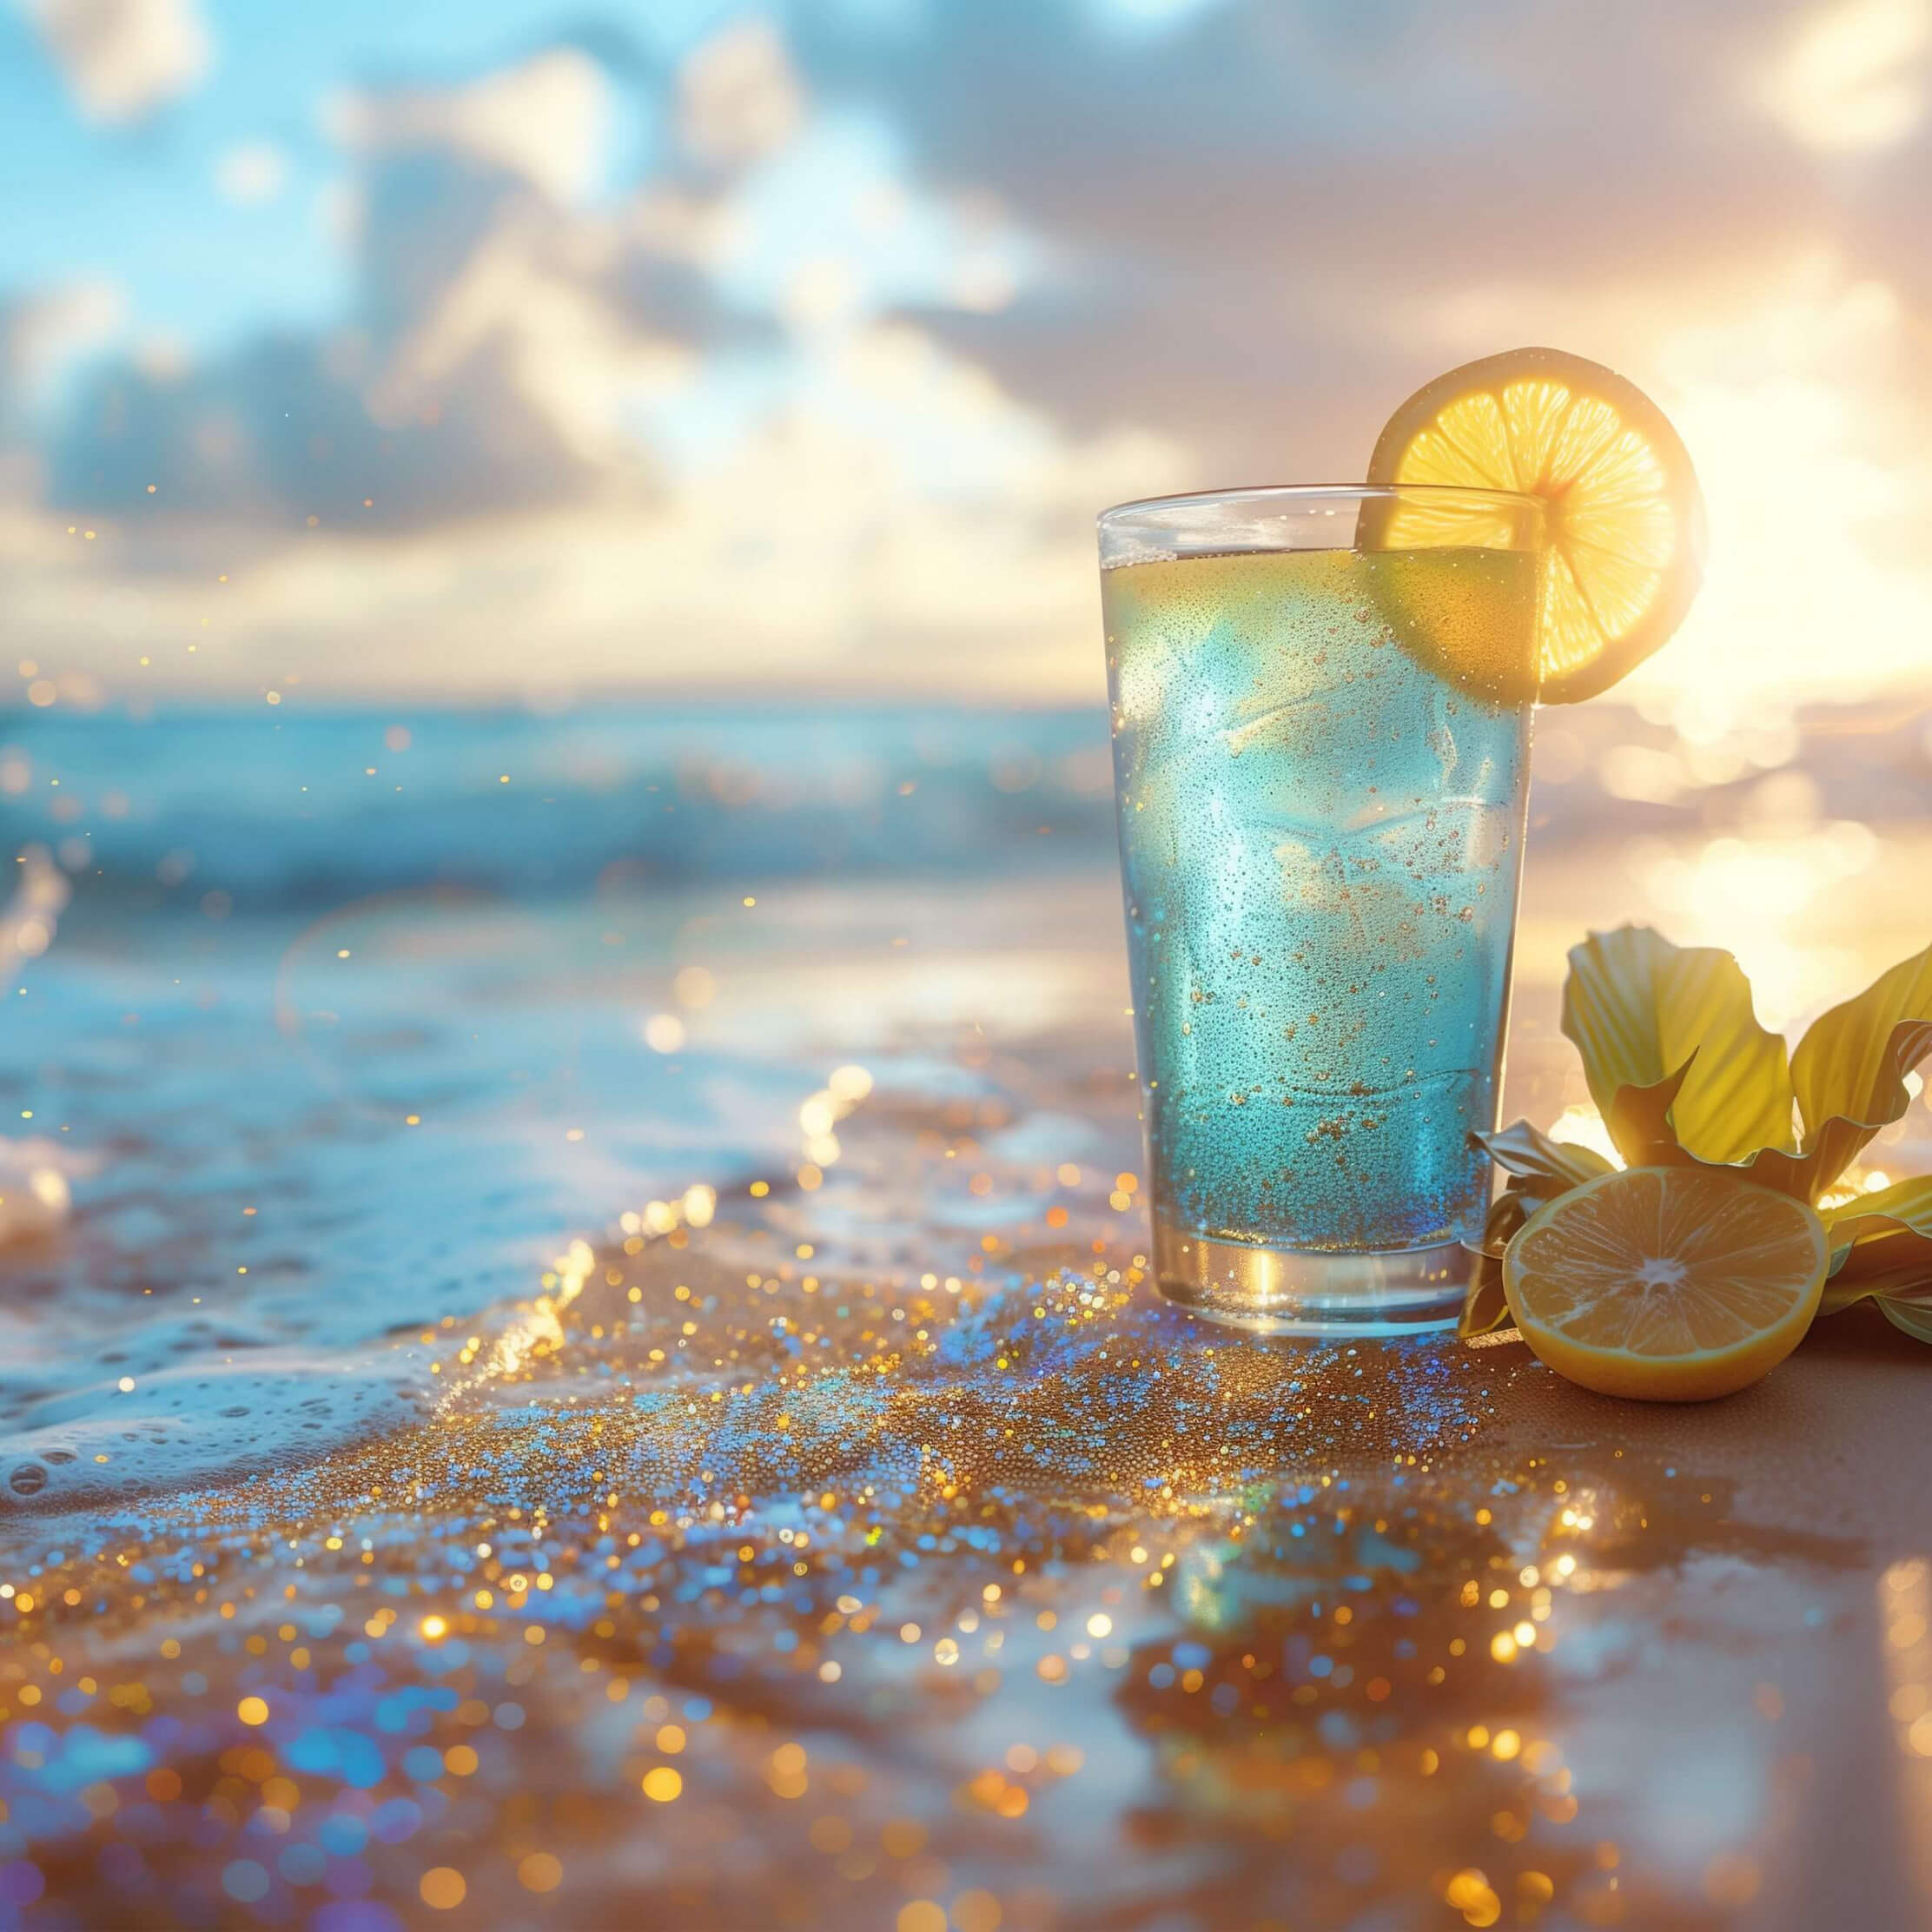 Cold drink on the ocean shore wallpaper 2224x2224